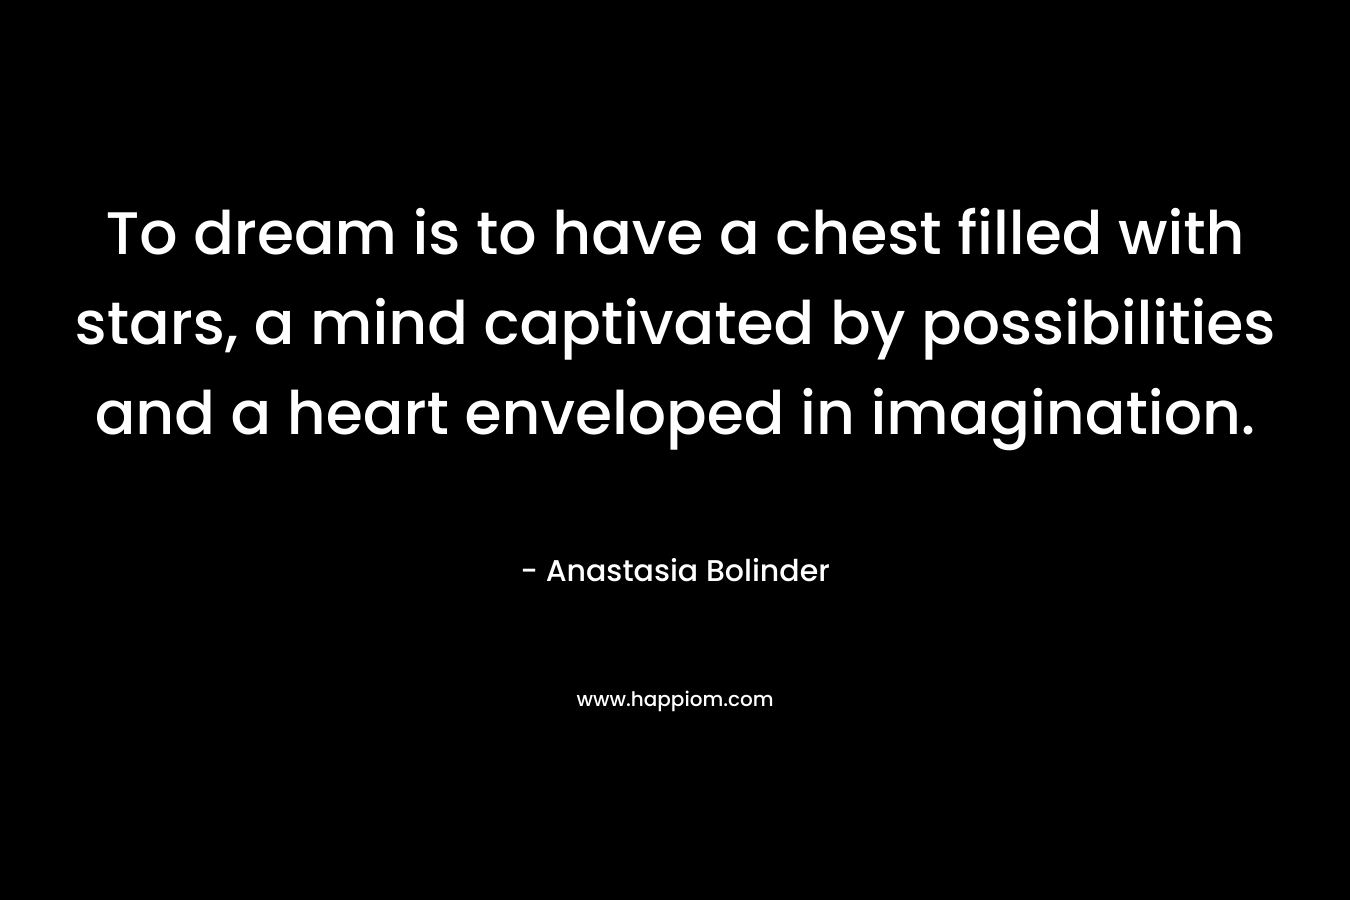 To dream is to have a chest filled with stars, a mind captivated by possibilities and a heart enveloped in imagination. – Anastasia Bolinder